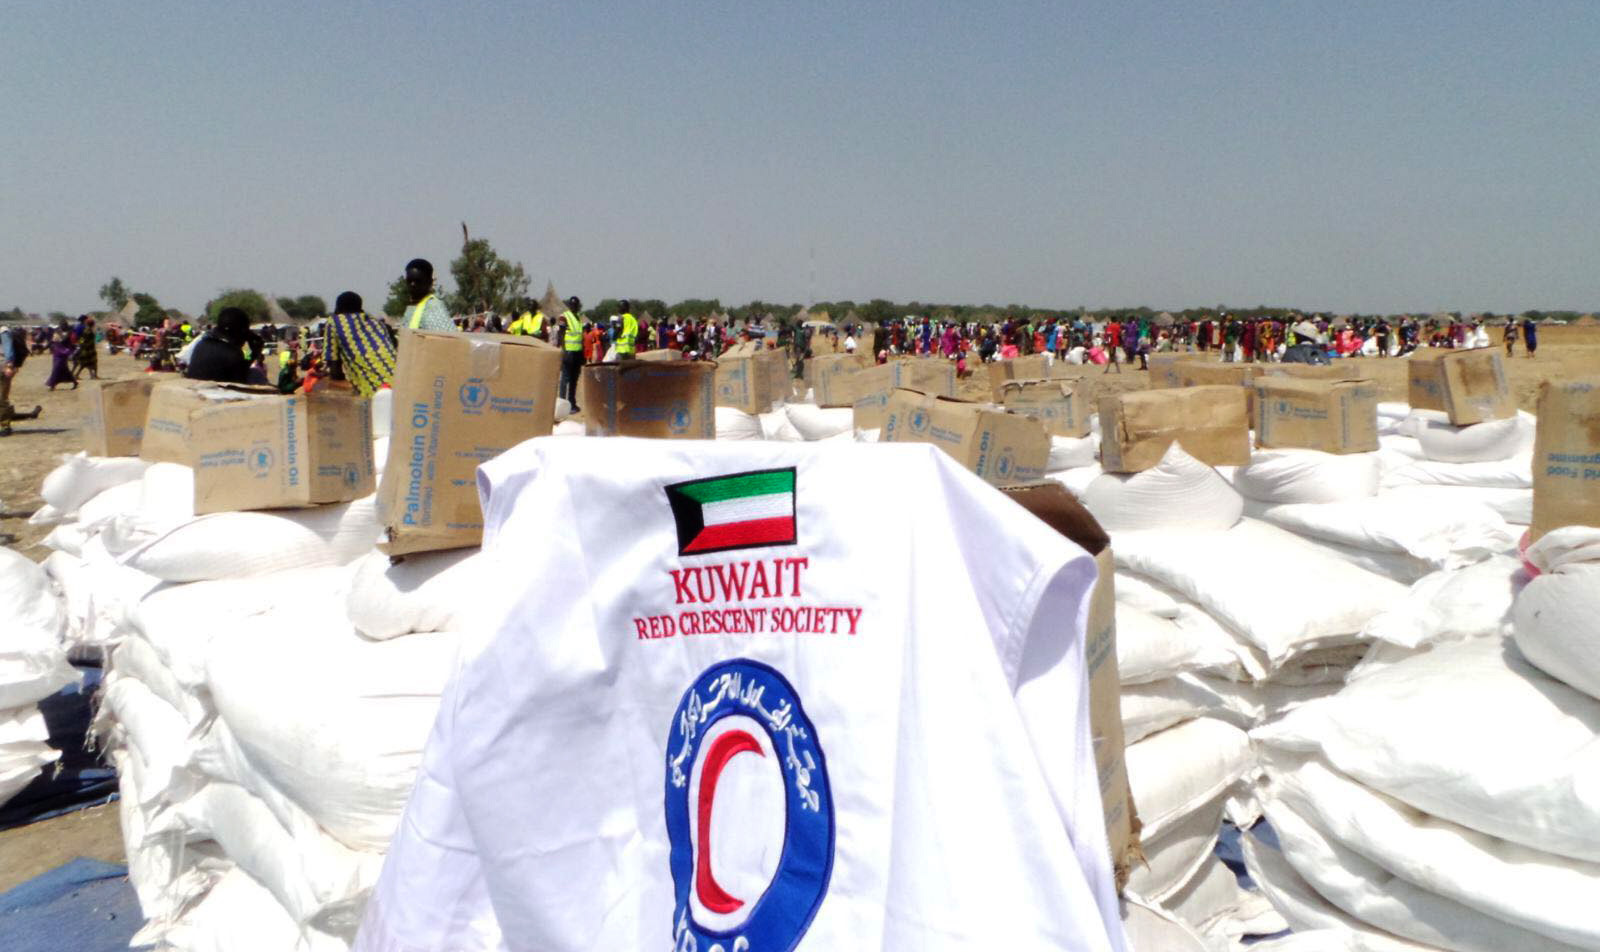 Food supplies to be distributed by Kuwait Red Crescent Society to displaced people in southern Sudan